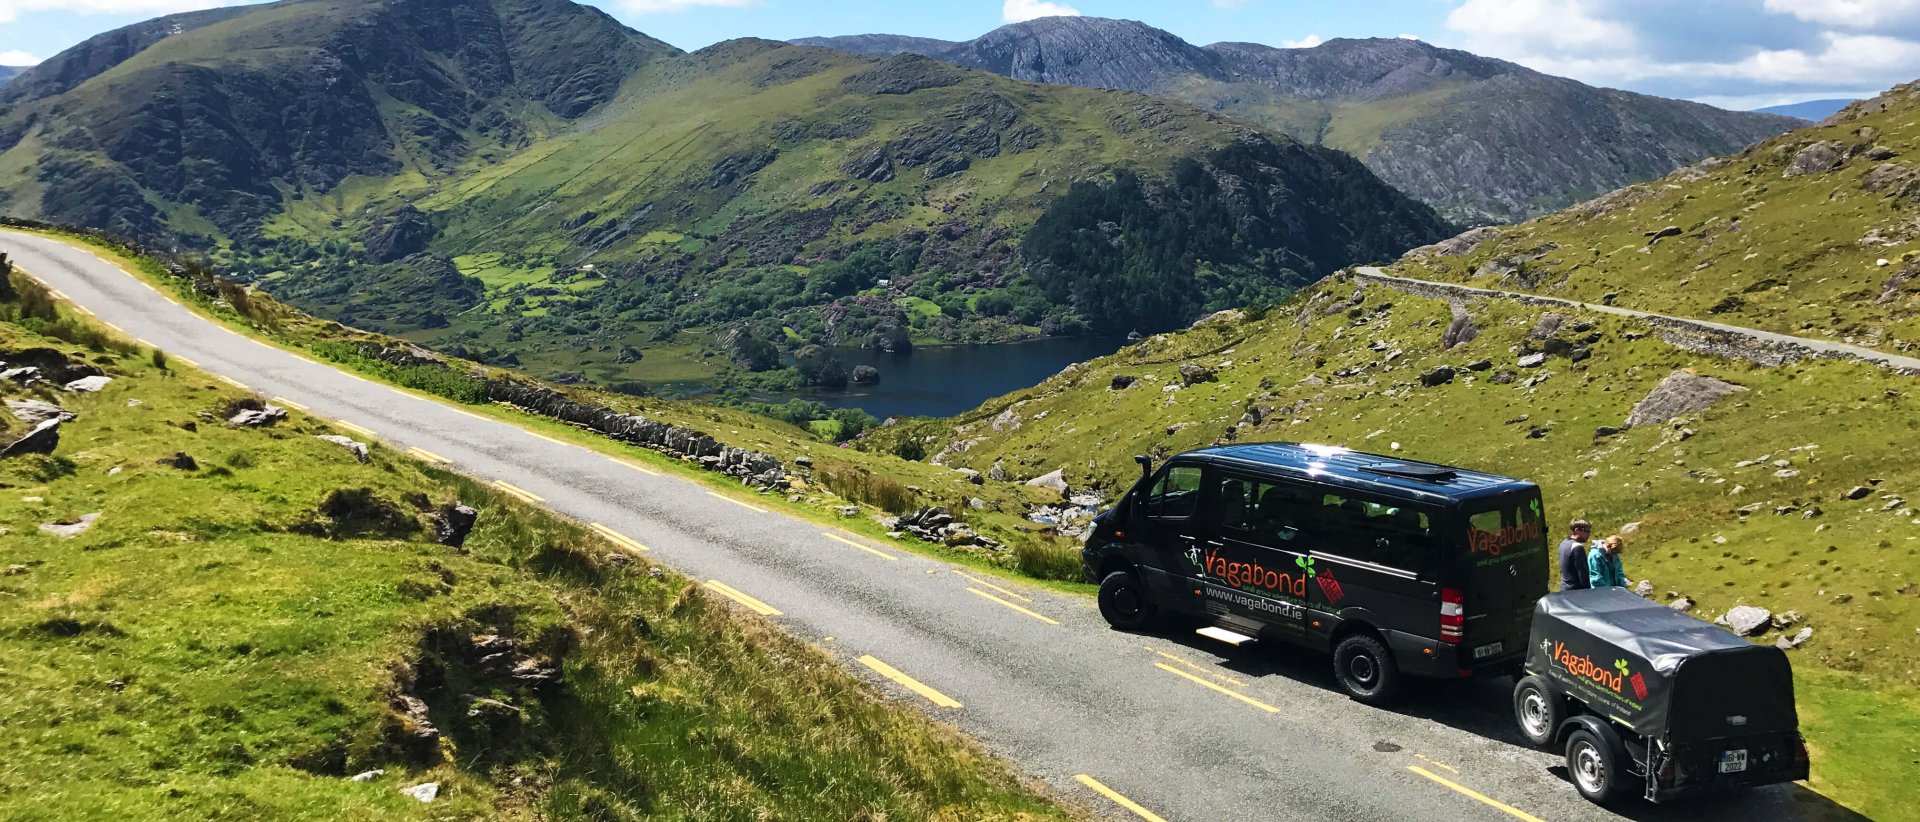 VagaTron Tour vehicle parked in a scenic location on the Healy Pass, Ireland